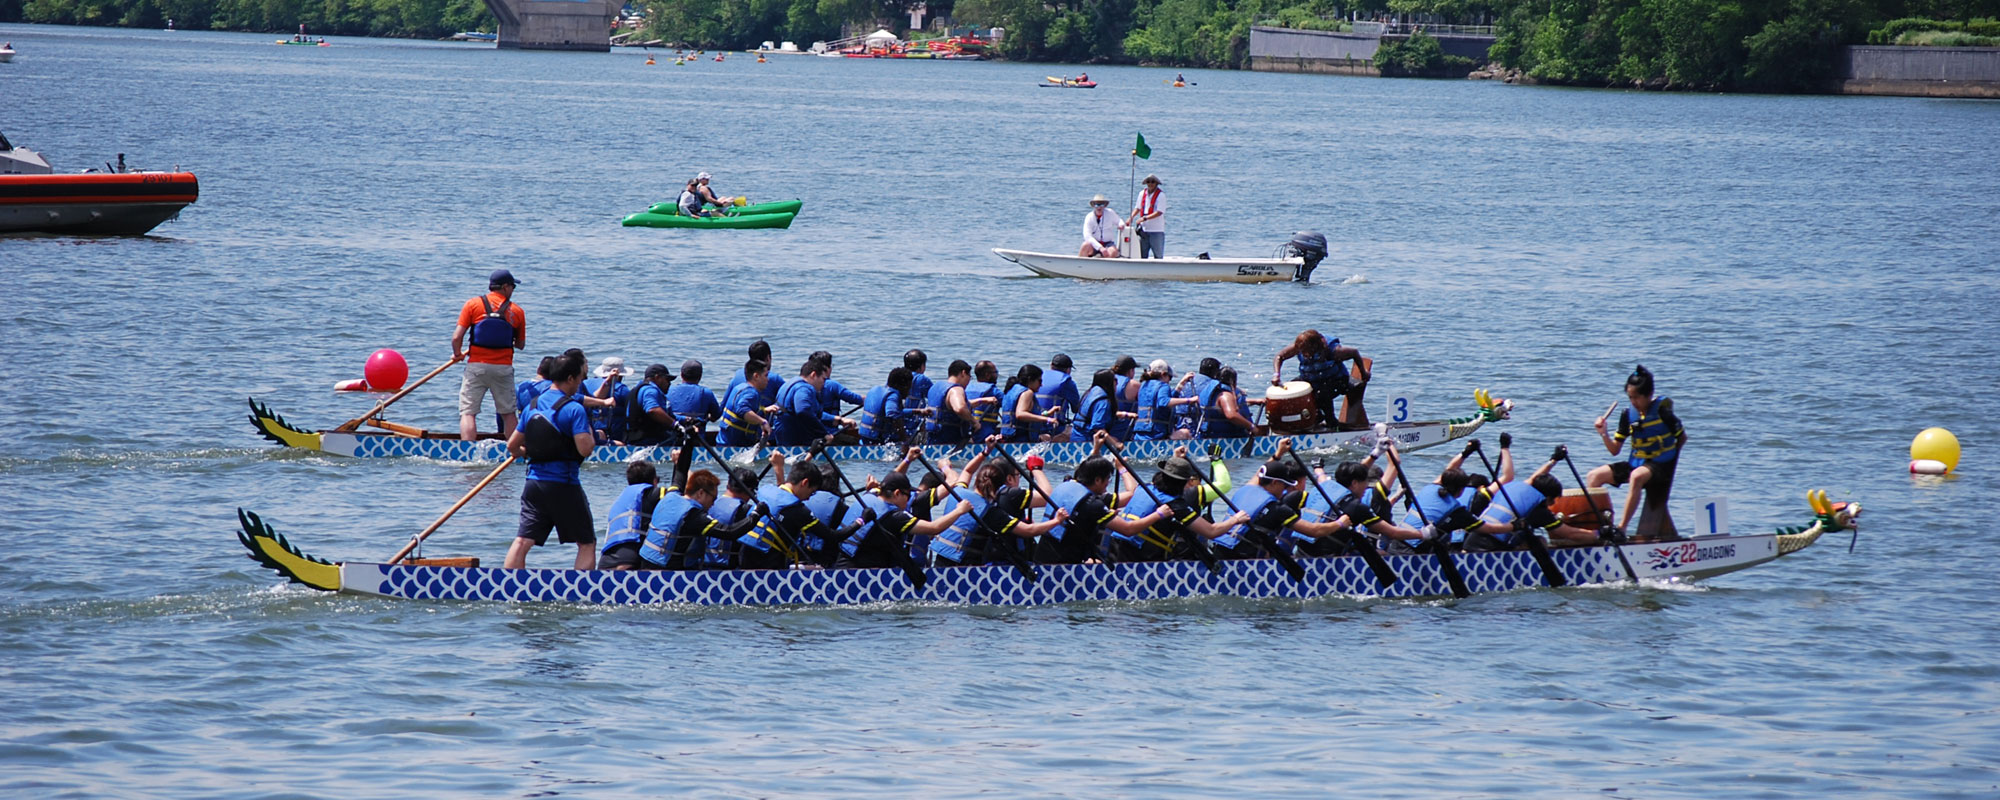 A dragon boat with 20 rowers is shown in silhouette as it moves along a river.